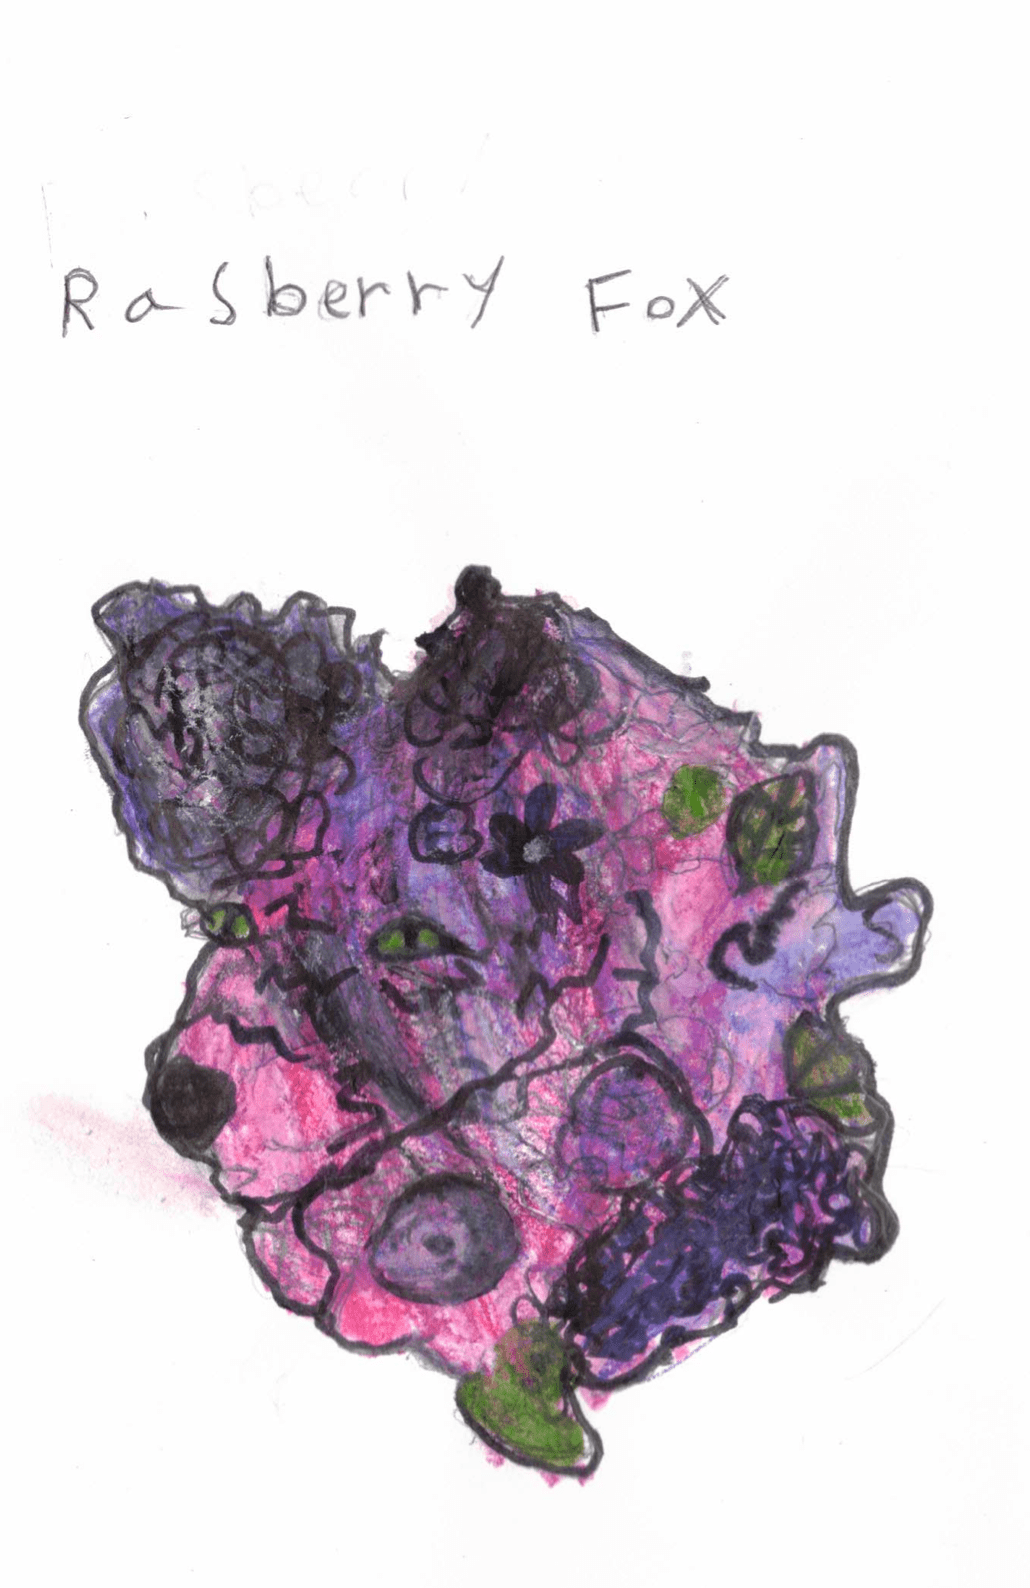 Rosewood+Calder "Raspberry Fox" purple, black, and blended vivid green pastel illustration of a fox bust